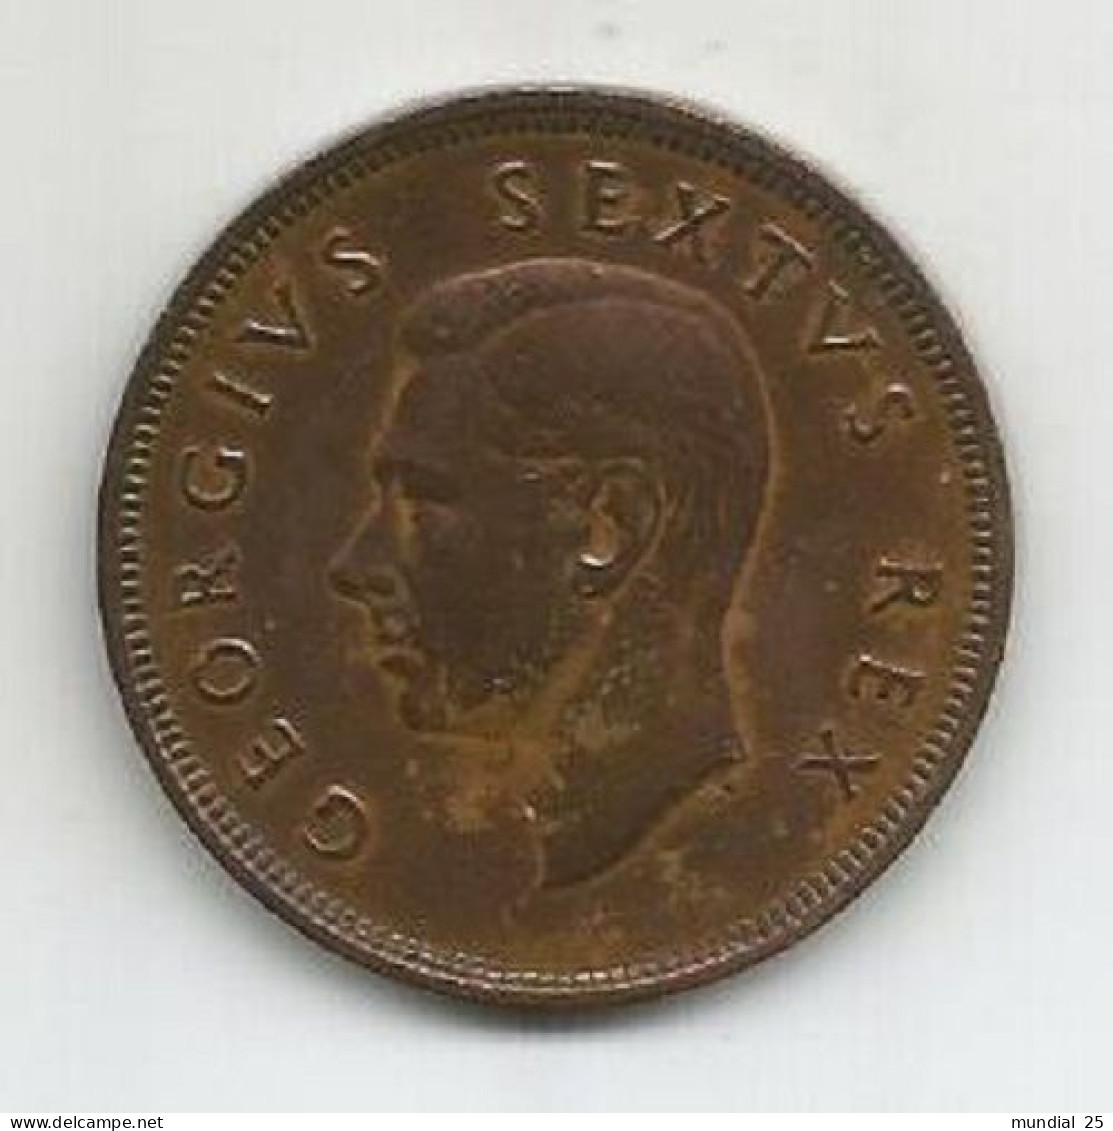 SOUTH AFRICA 1 PENNY 1950 - Sud Africa